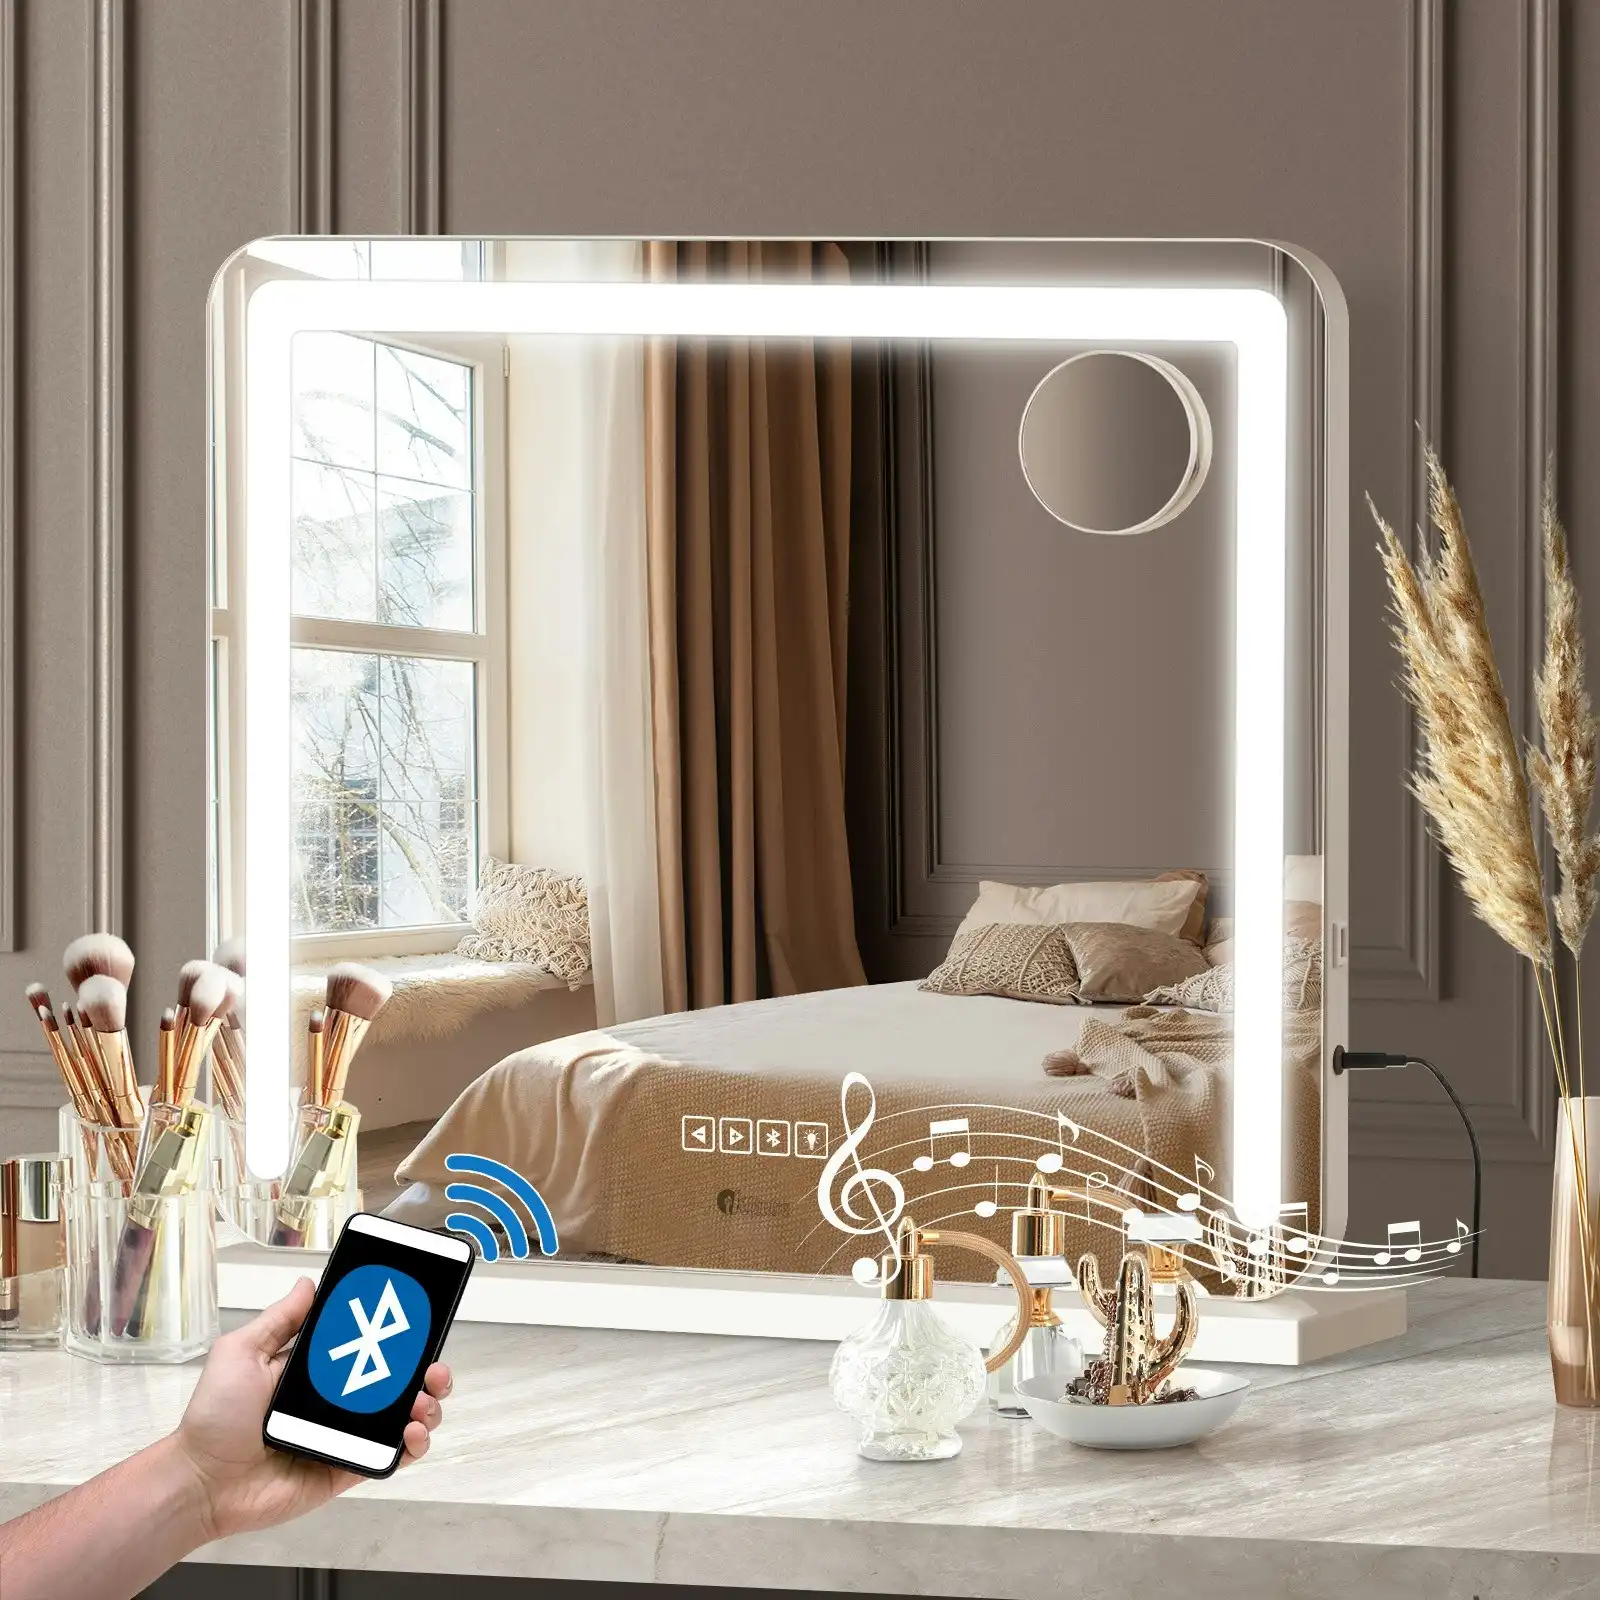 Oikiture 60x52cm Bluetooth Hollywood LED Makeup Mirror Vanity Wall Mirrors Standing Wall Mounted